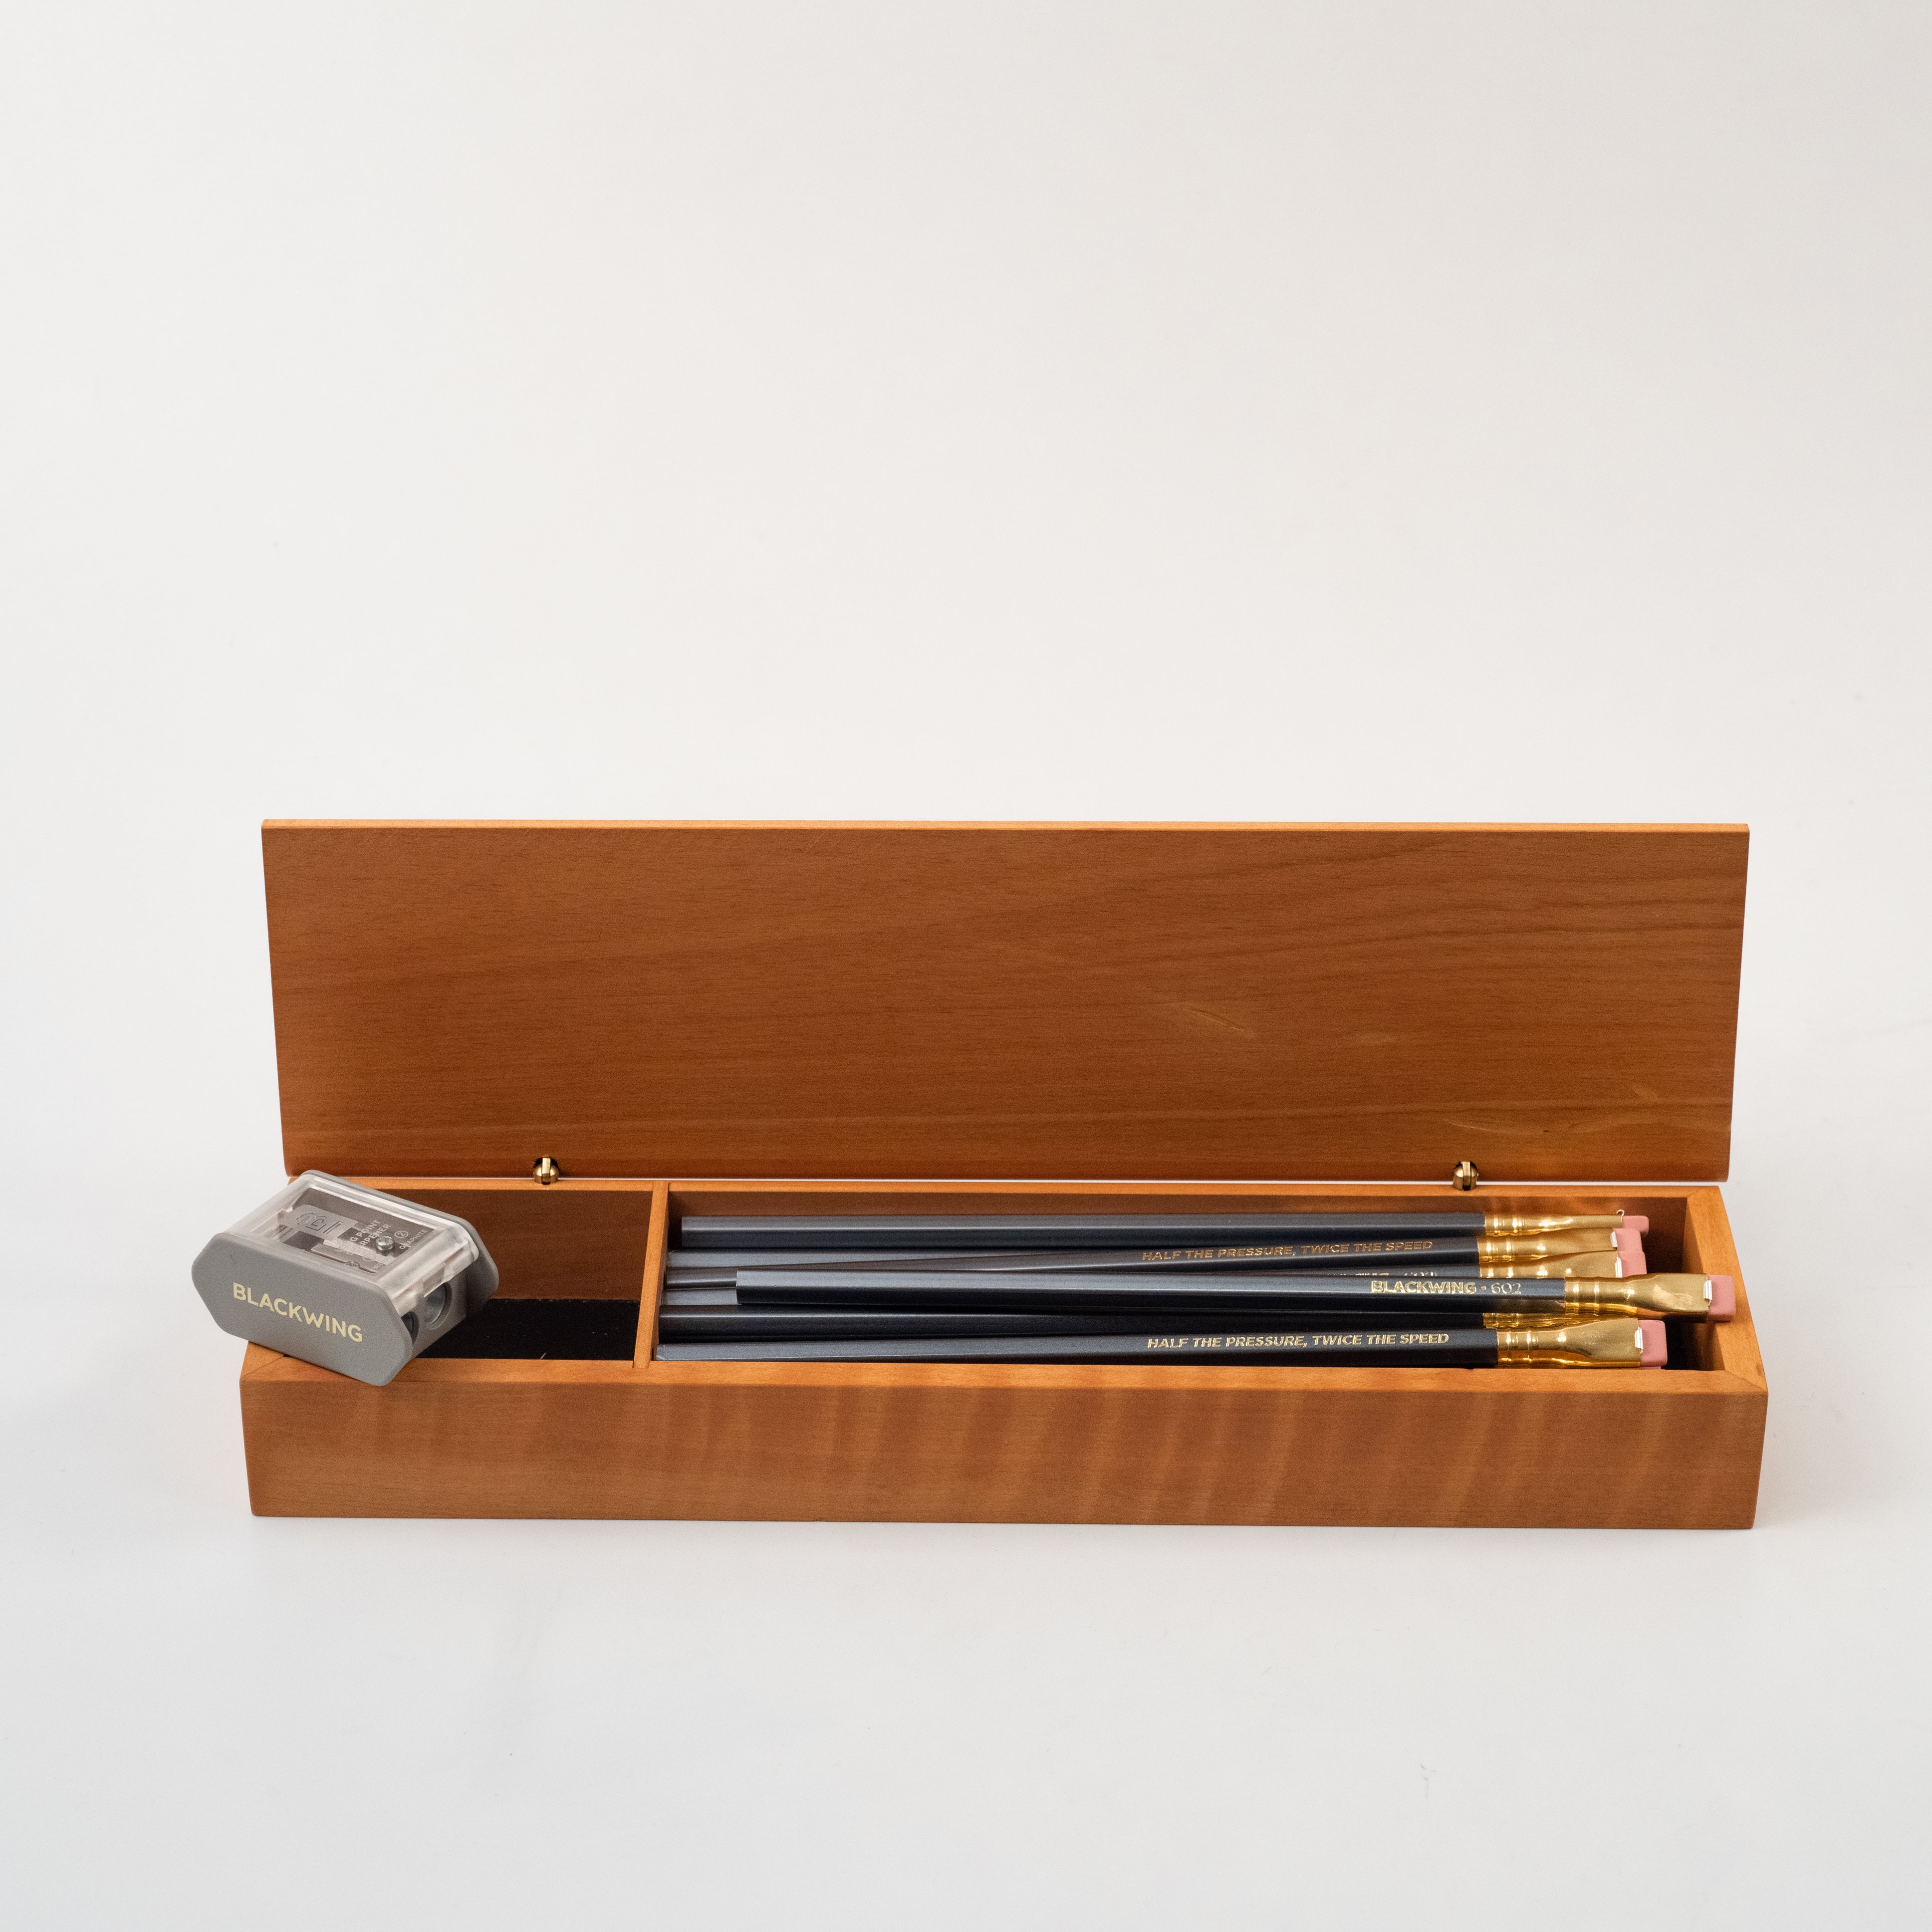 Blackwing Pencils - Box of 12 – Case for Making